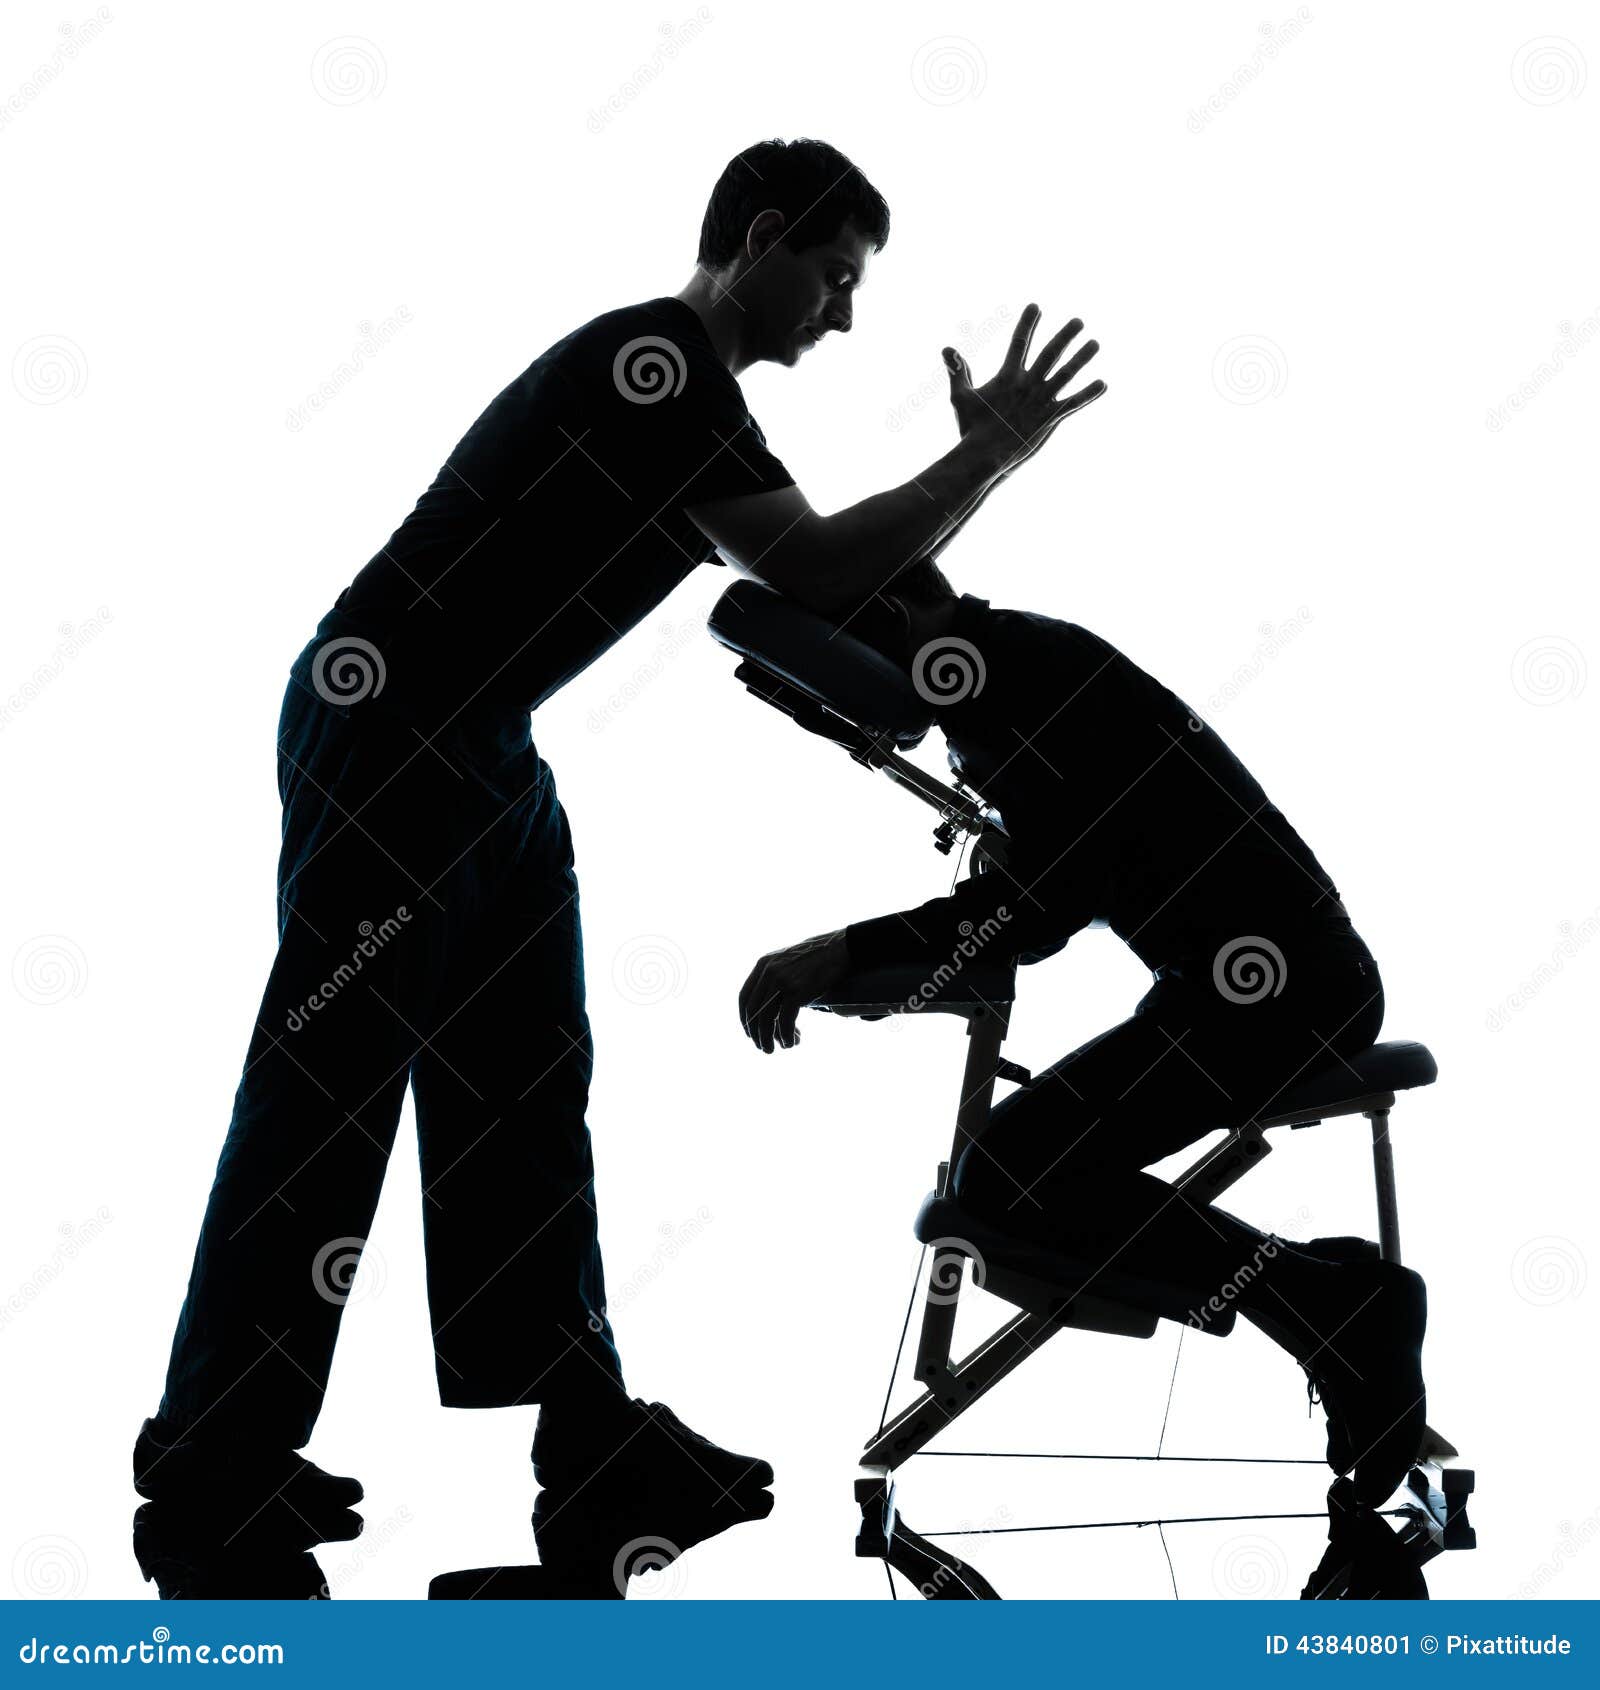 Back Massage Therapy With Chair Silhouette Stock Image Image Of Silhouette Medical 43840801